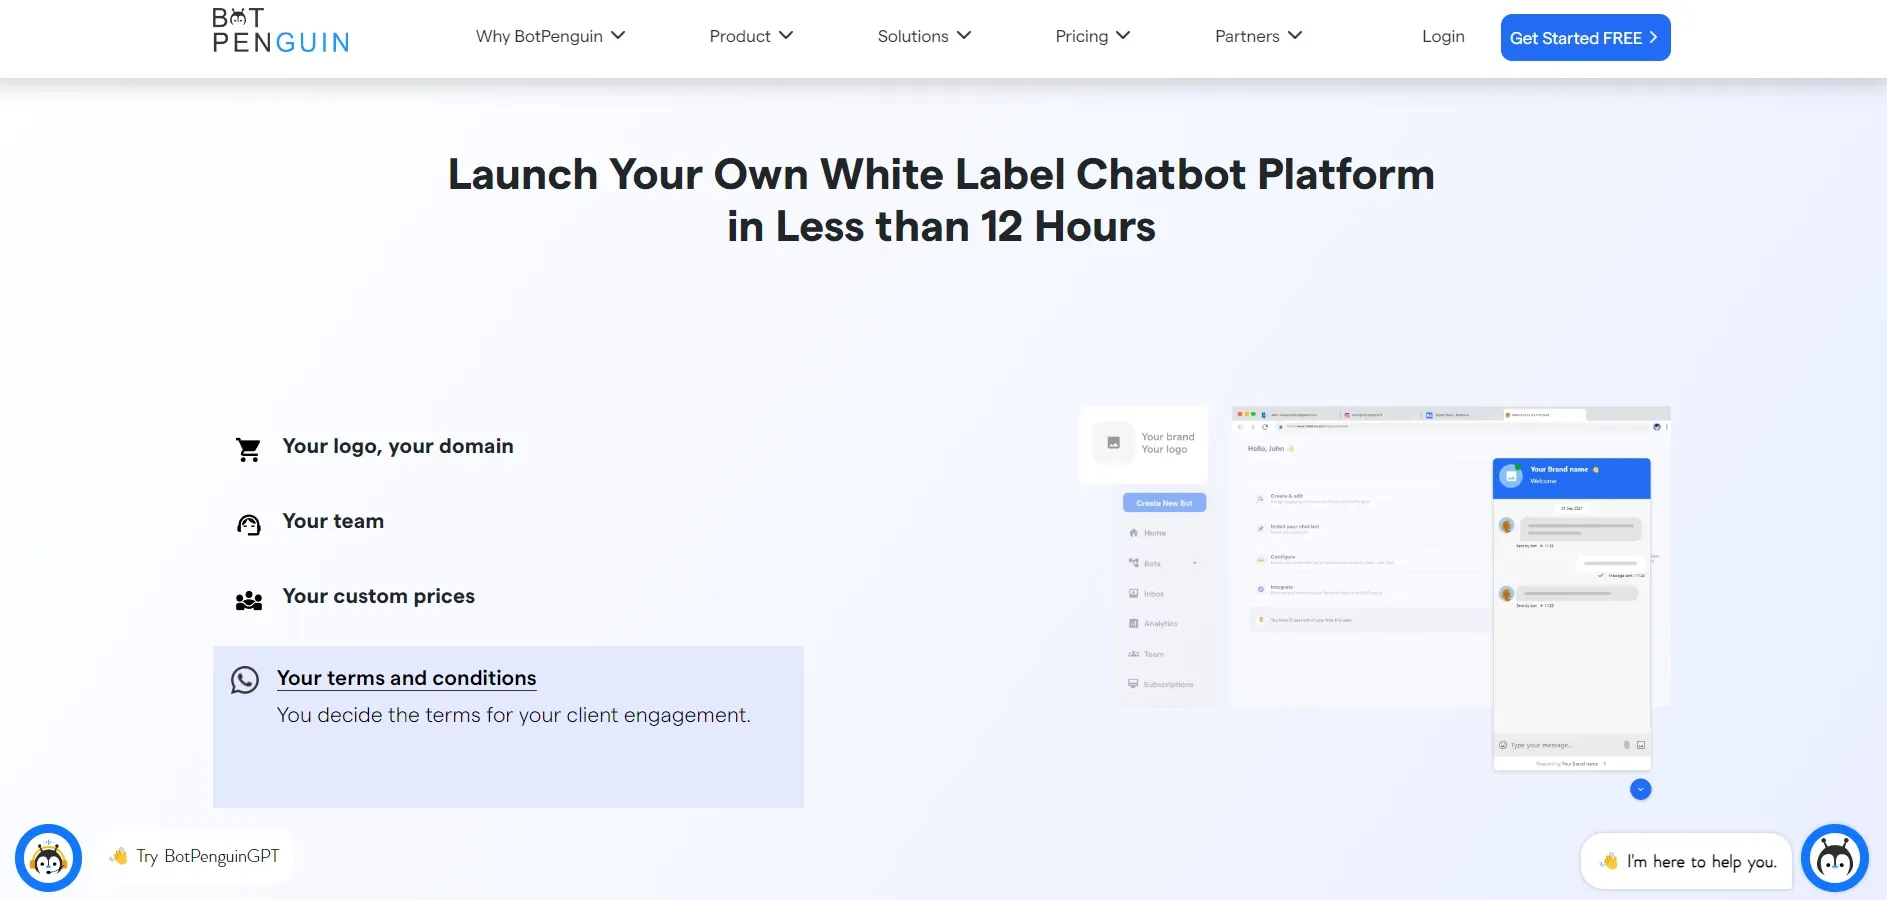 Why are White Label Partnerships needed? 